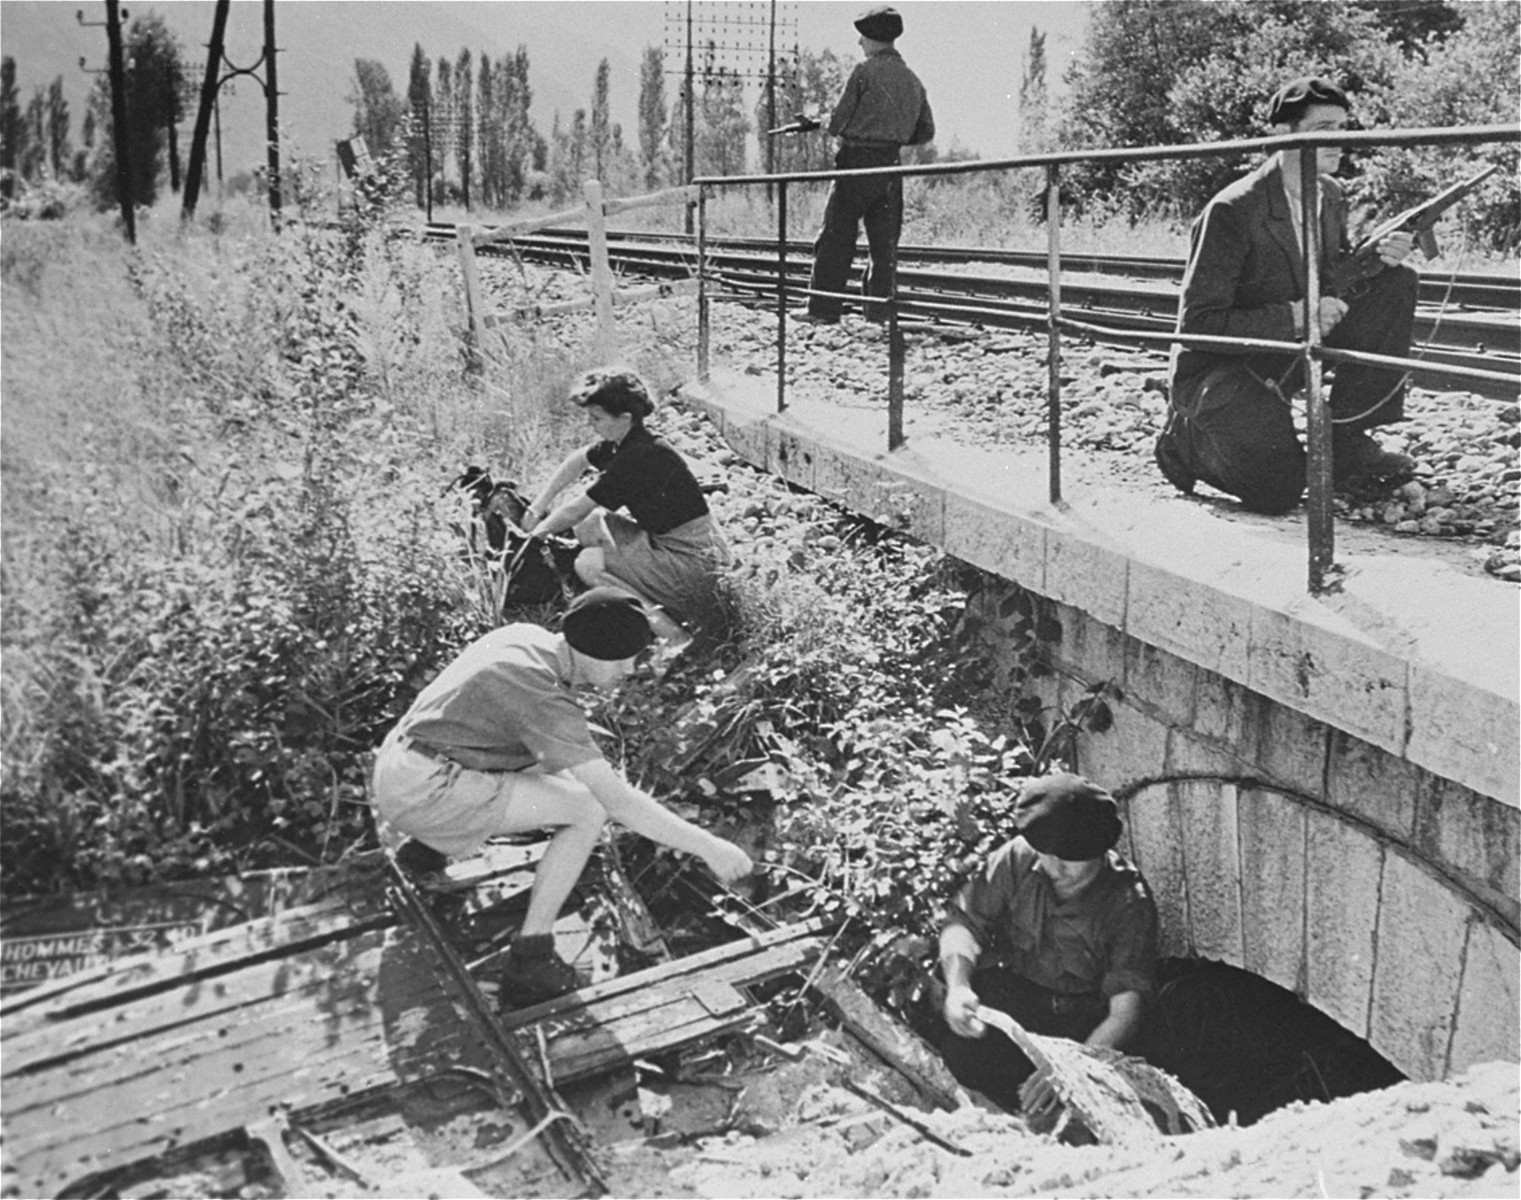 Members of the Maquis of Voireppe in the Chartreuse Region of the French Alps demonstrate the method used to place dynamite demolition charges under a railroad trestle to delay Nazi supplies.